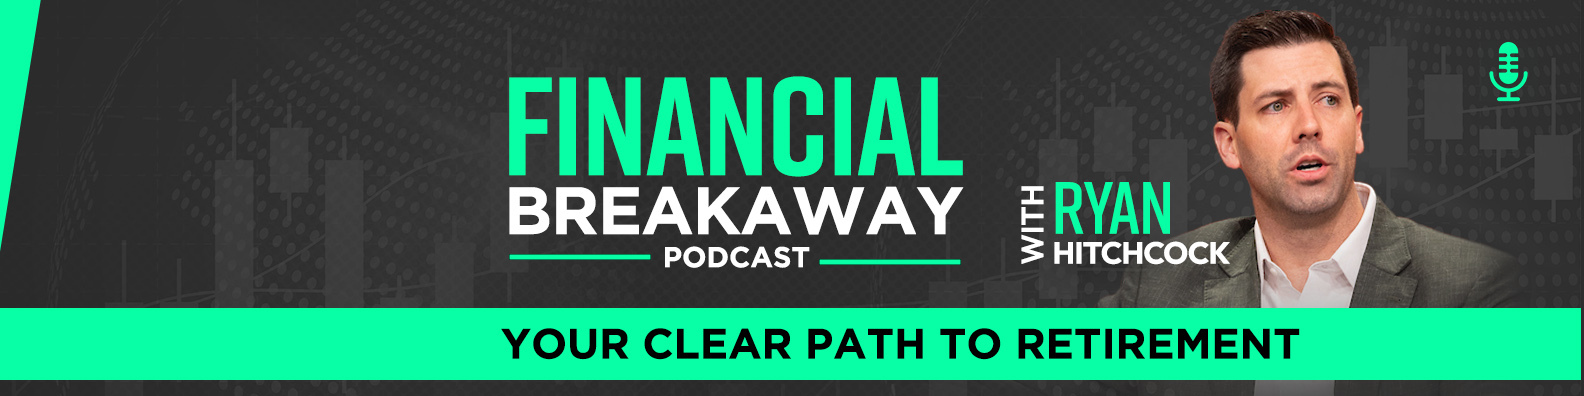 Financial Breakaway: Your Clear Path to Retirement